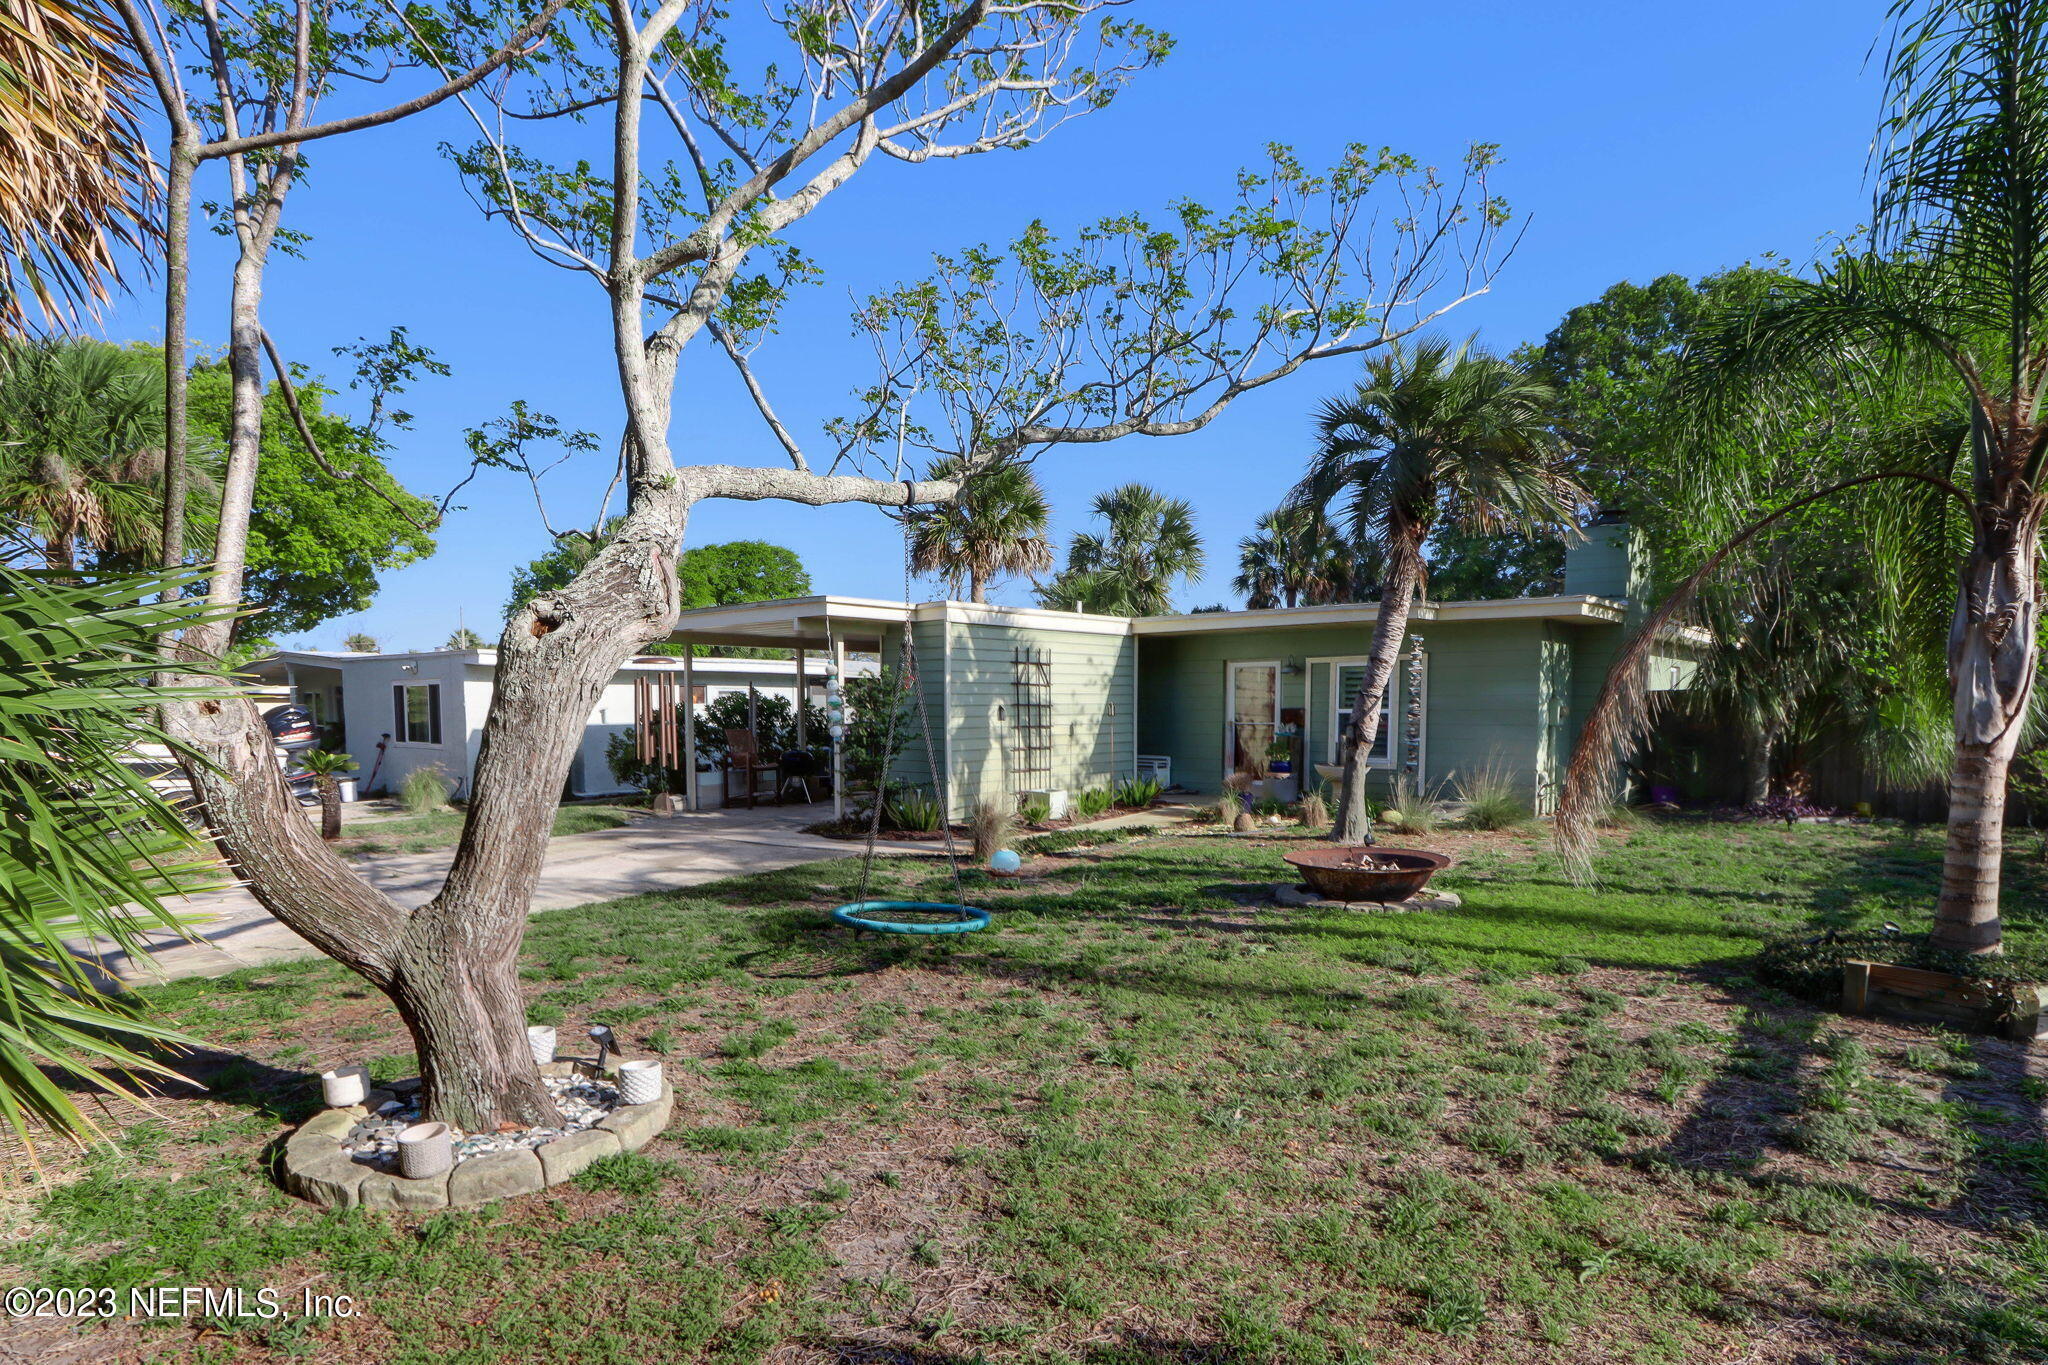 Jacksonville Beach, FL home for sale located at 936 4th Avenue N, Jacksonville Beach, FL 32250